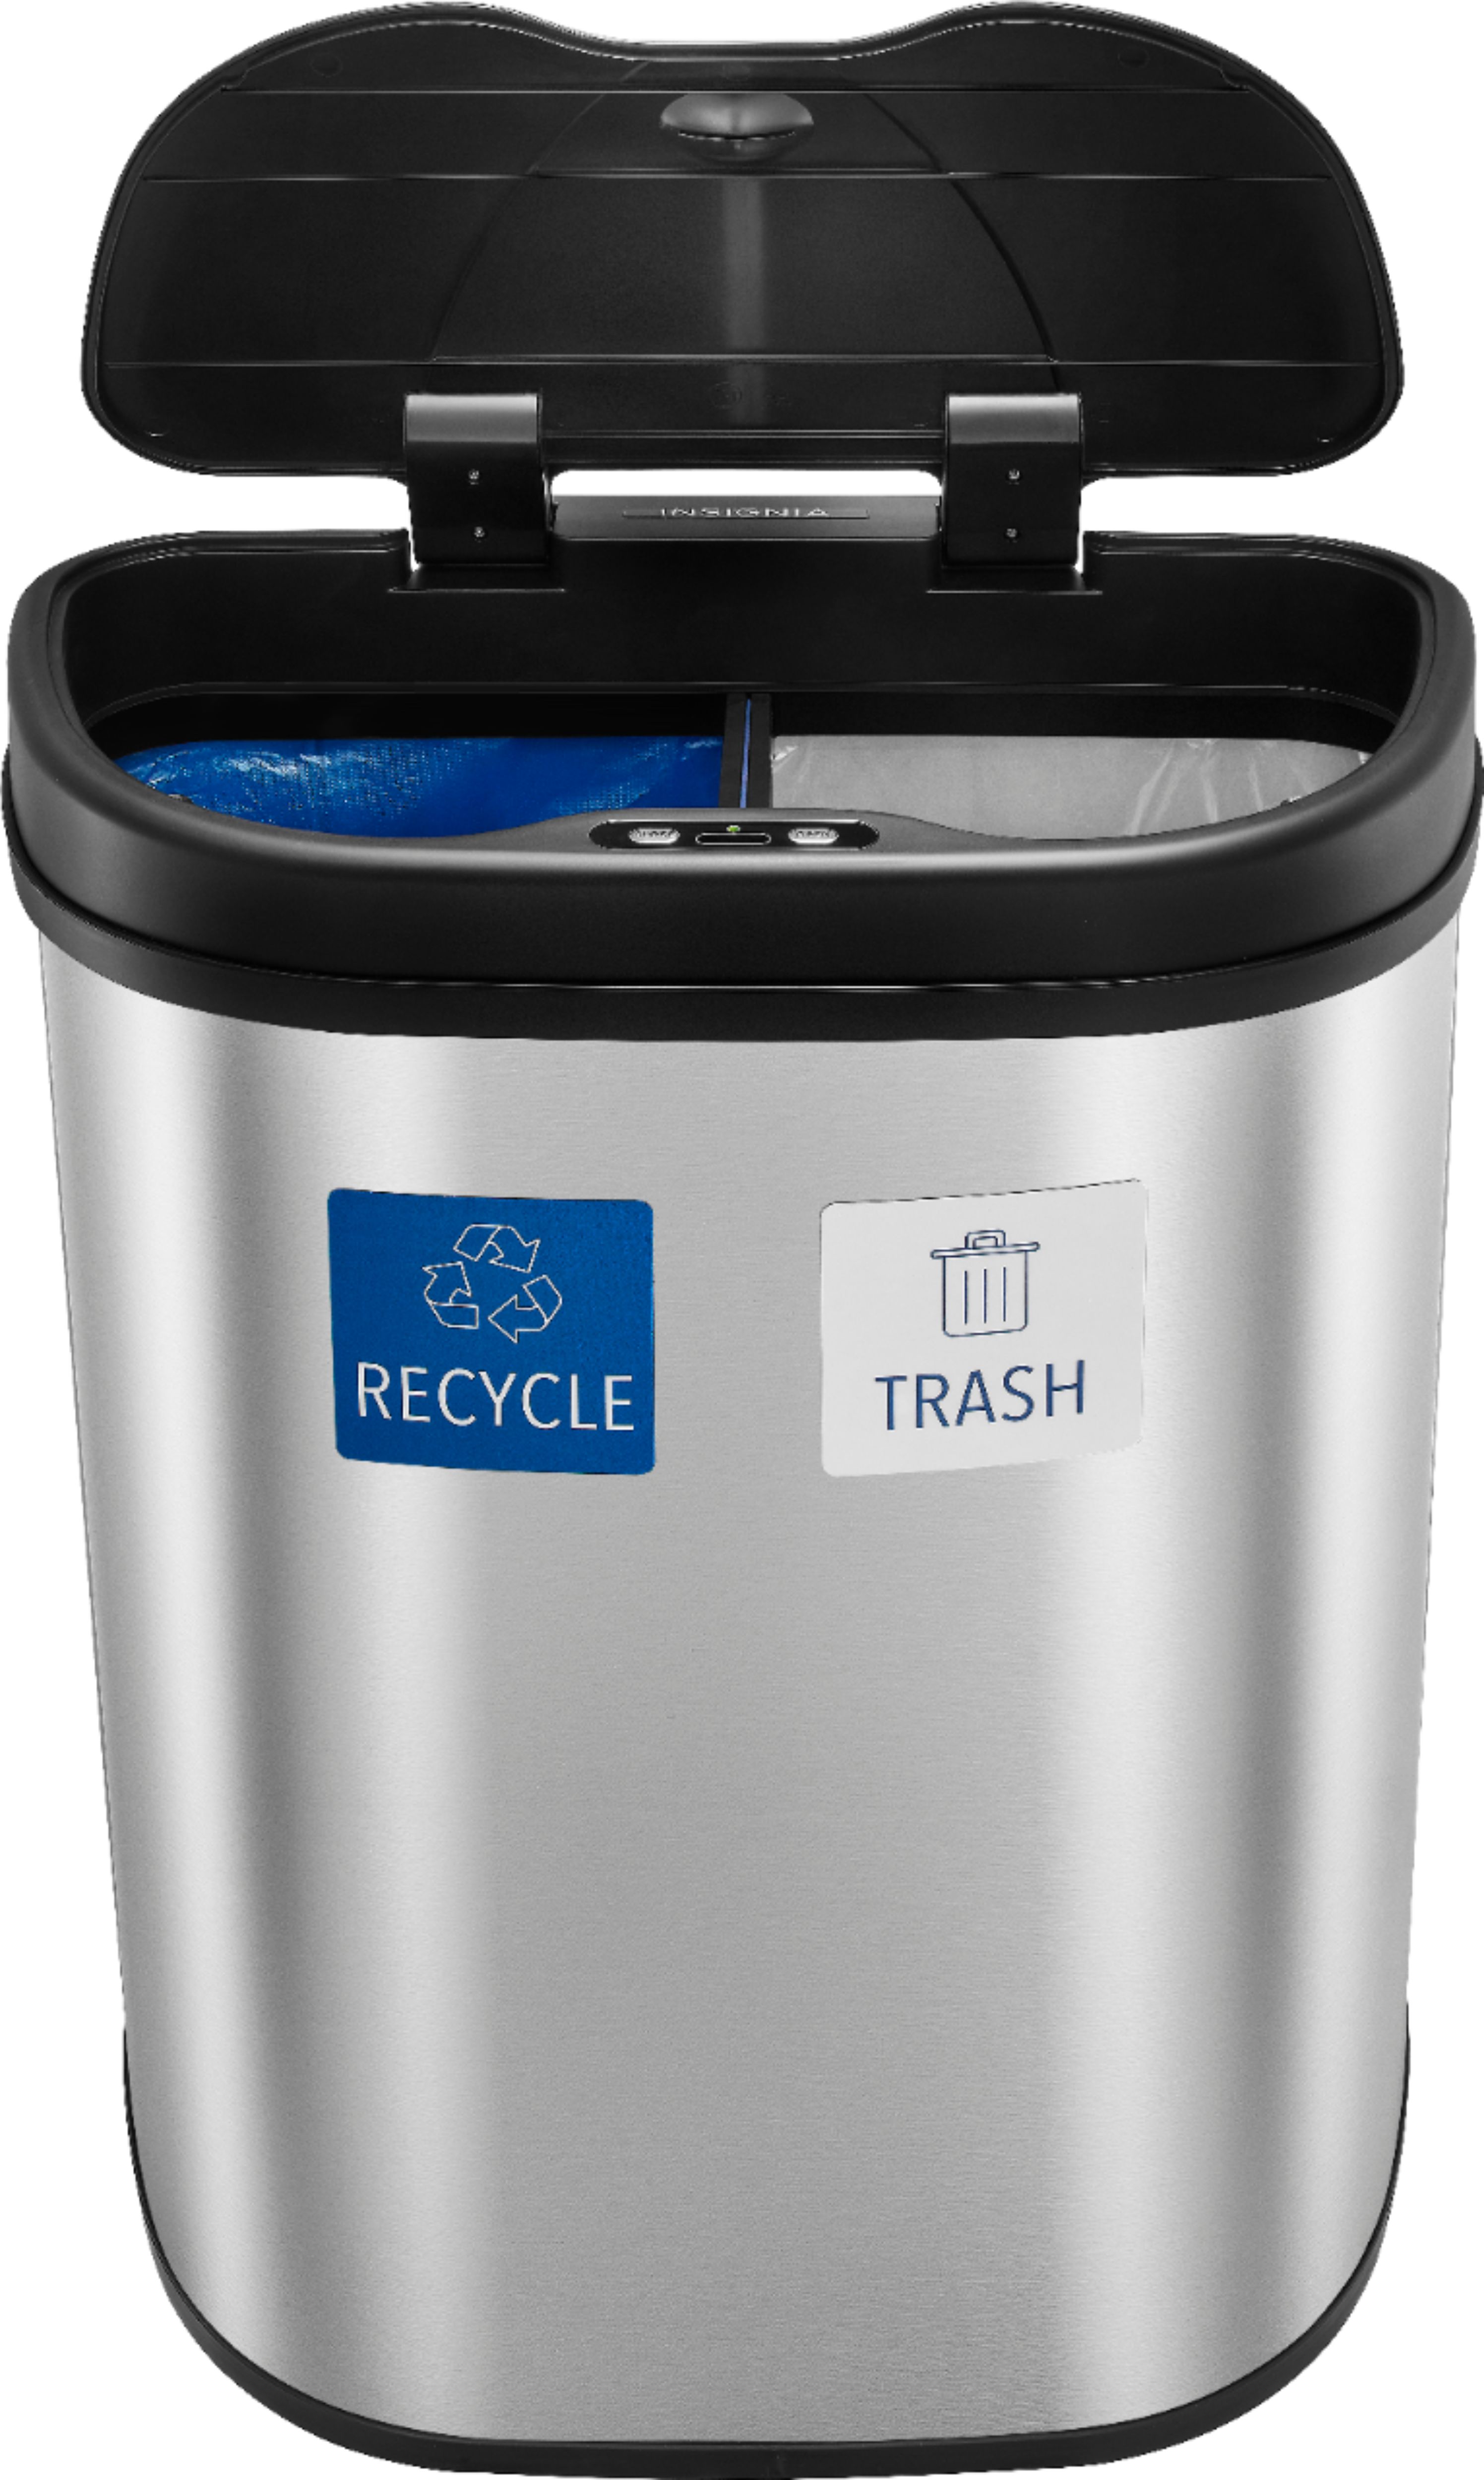 Insignia™ 13 Gal. Automatic Trash Can Stainless Steel NS-ATC13SS1 - Best Buy